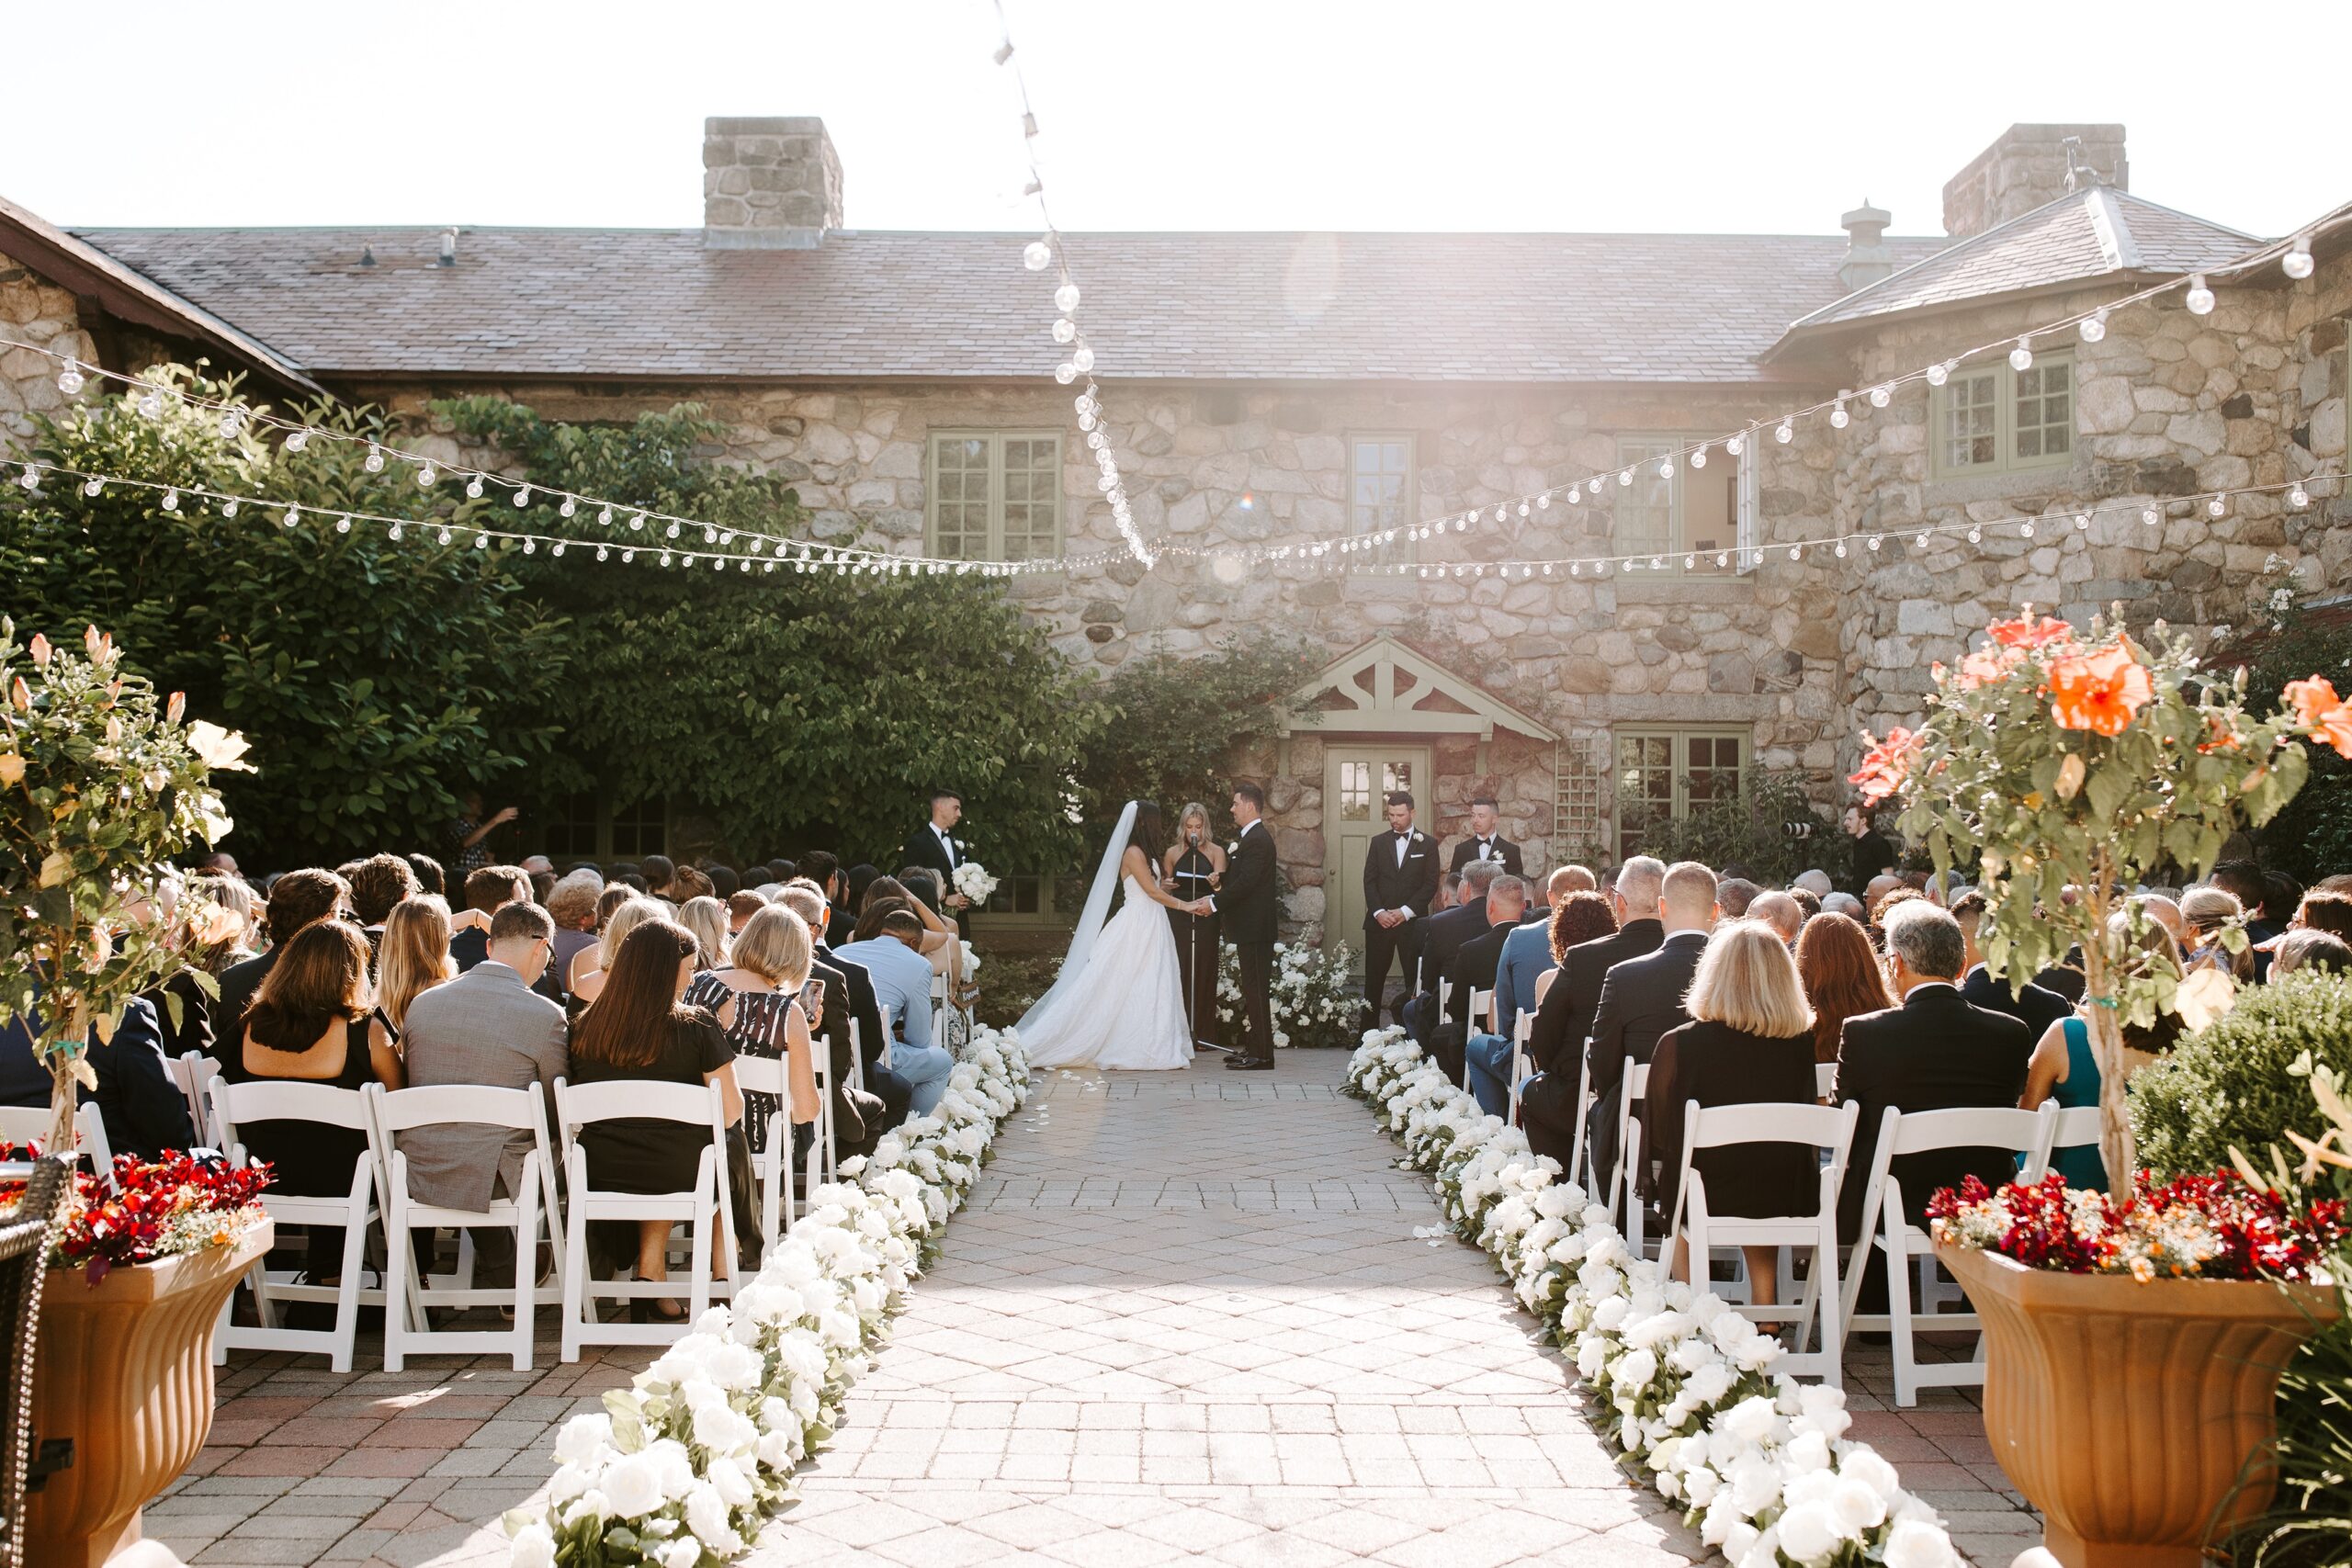 Outdoor ceremony at the Willowdale Estate wedding